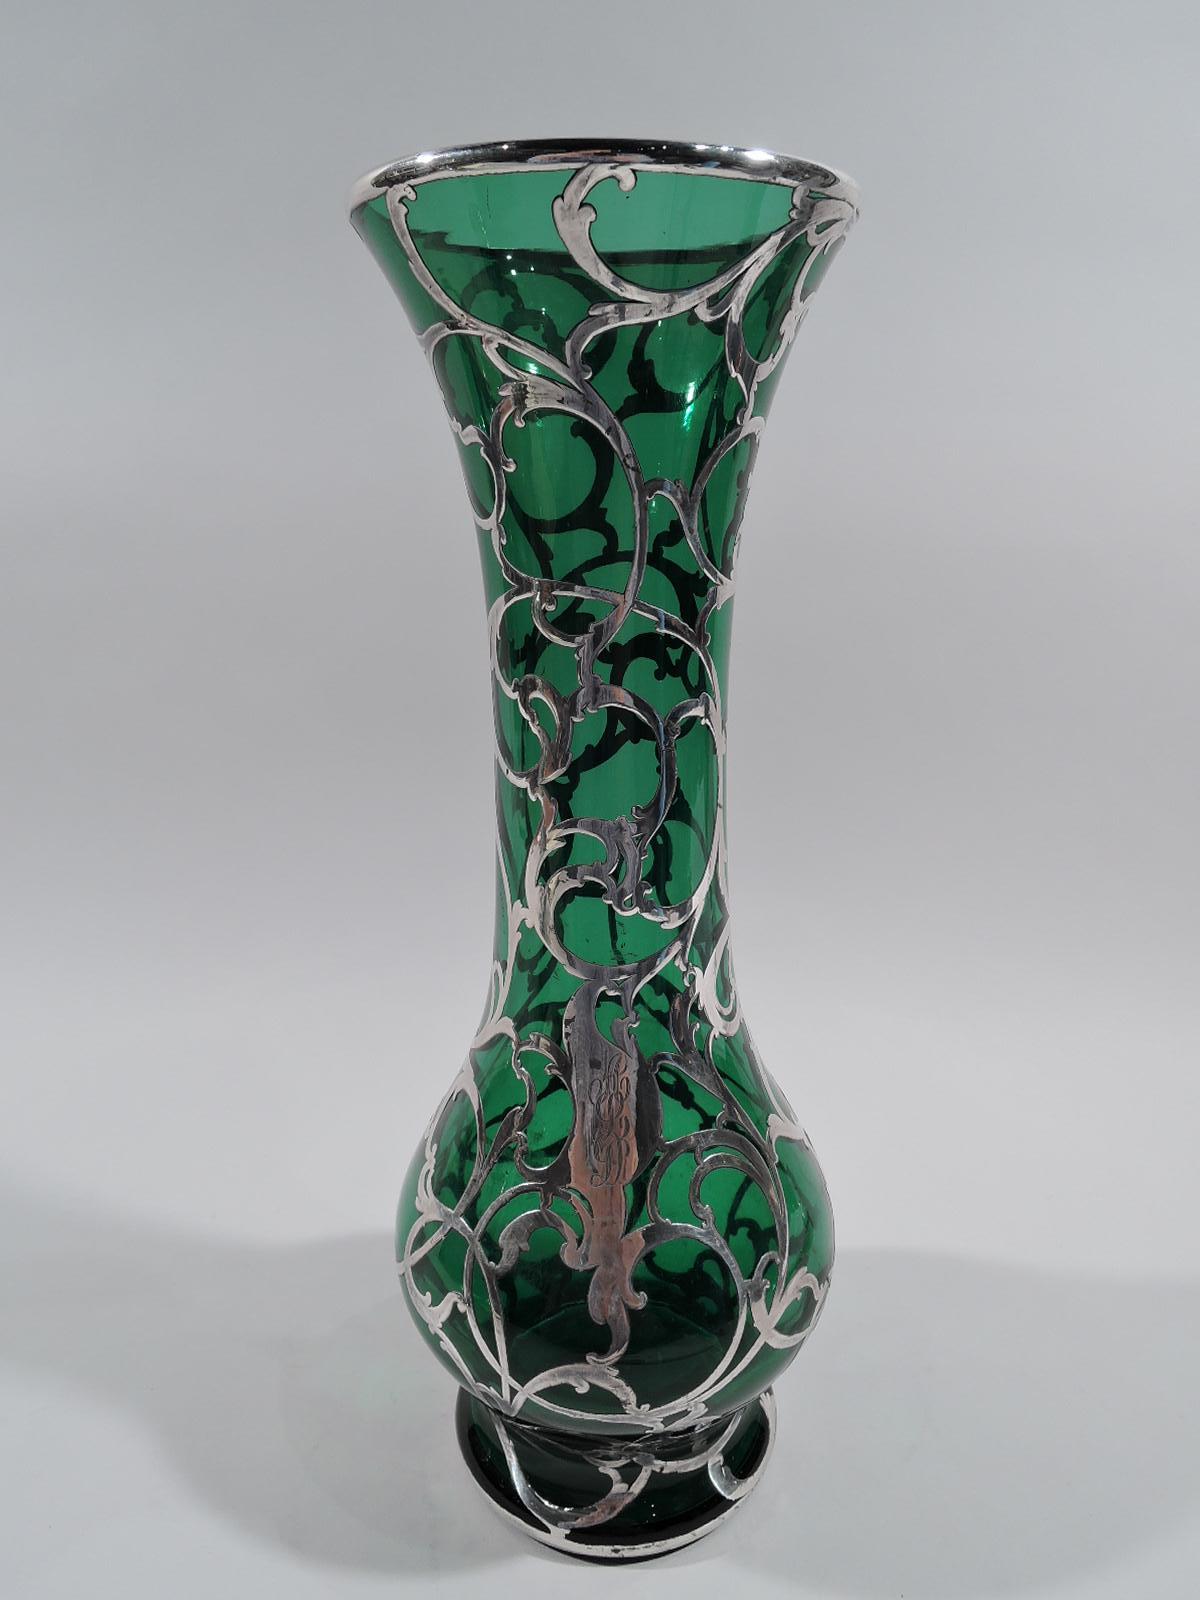 Turn-of-the-century Art Nouveau glass vase with engraved silver overlay. Made by Alvin in Providence. Flared mouth, cylindrical neck, gently globular bowl, and inset foot. Fluid and open leafy scroll overlay, and asymmetrical cartouche engraved with